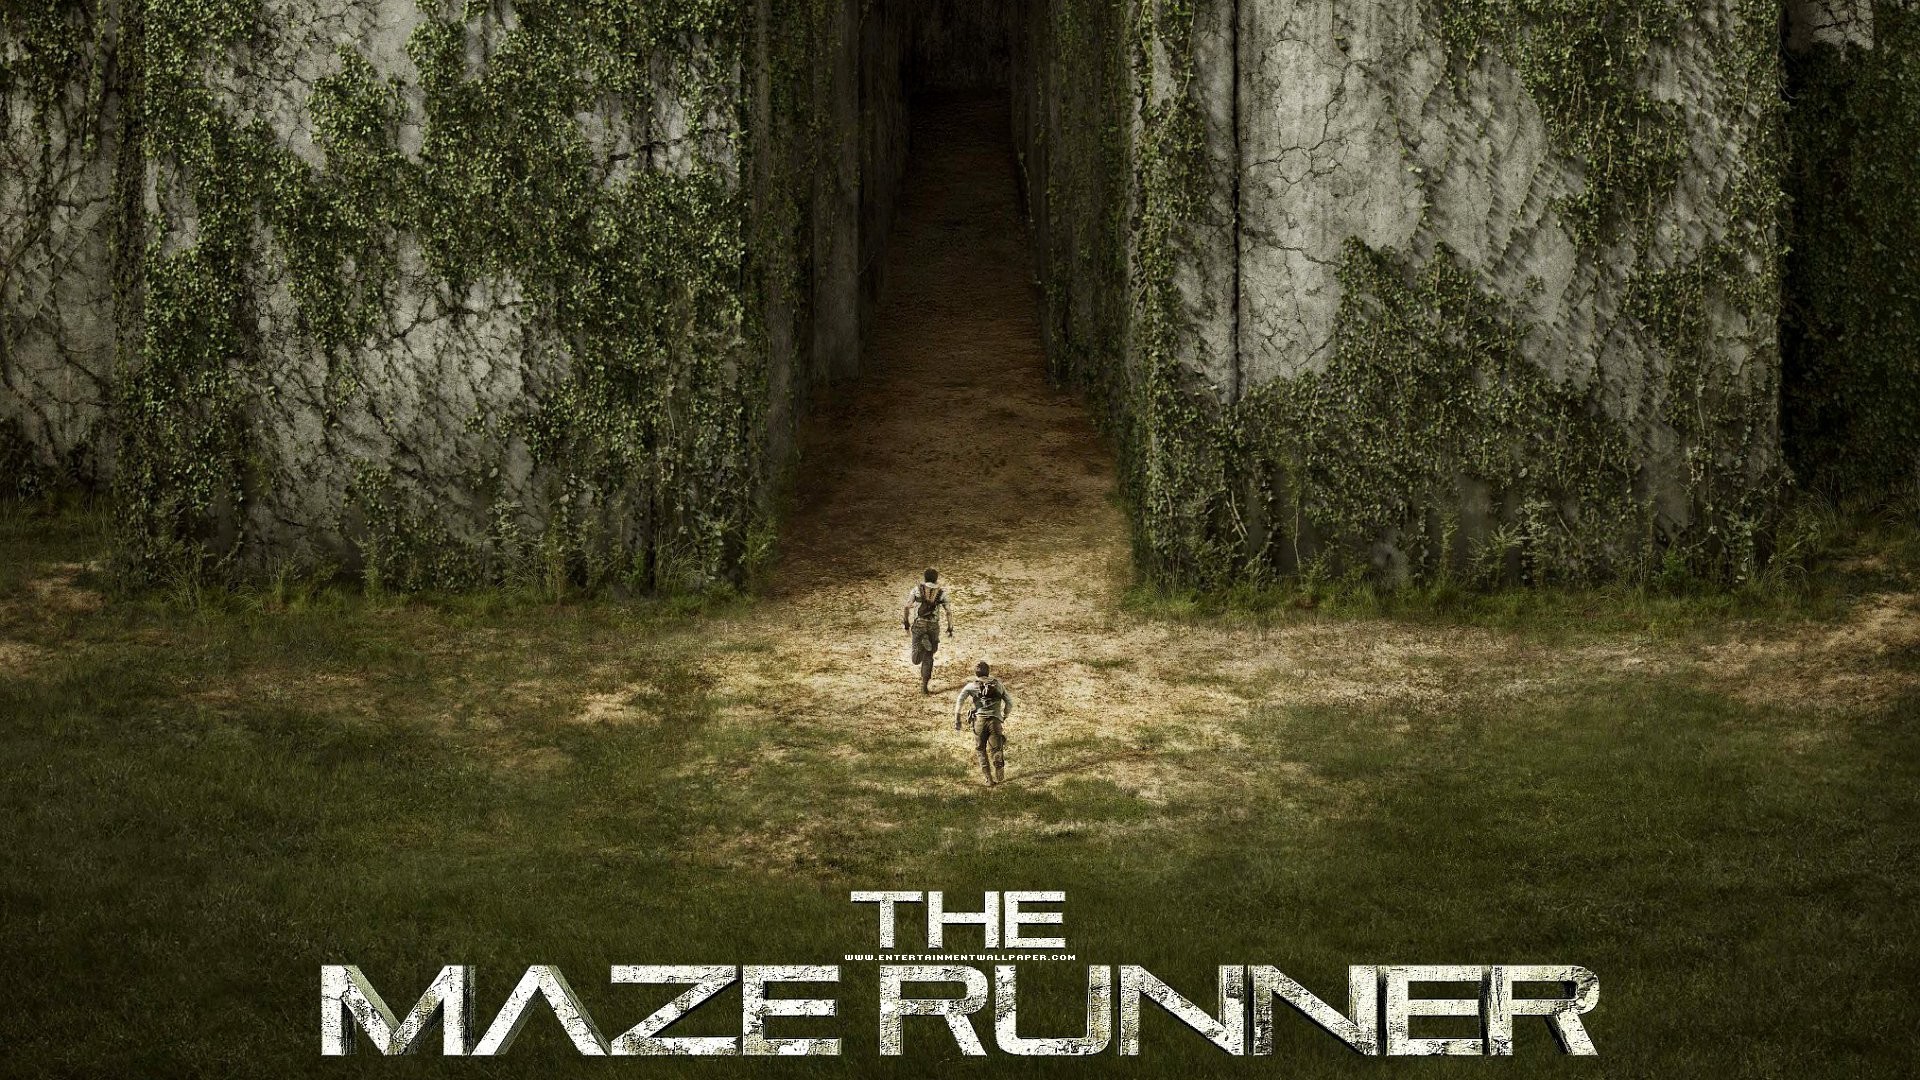 The Maze Runner Wallpapers Wallpapertag Images, Photos, Reviews